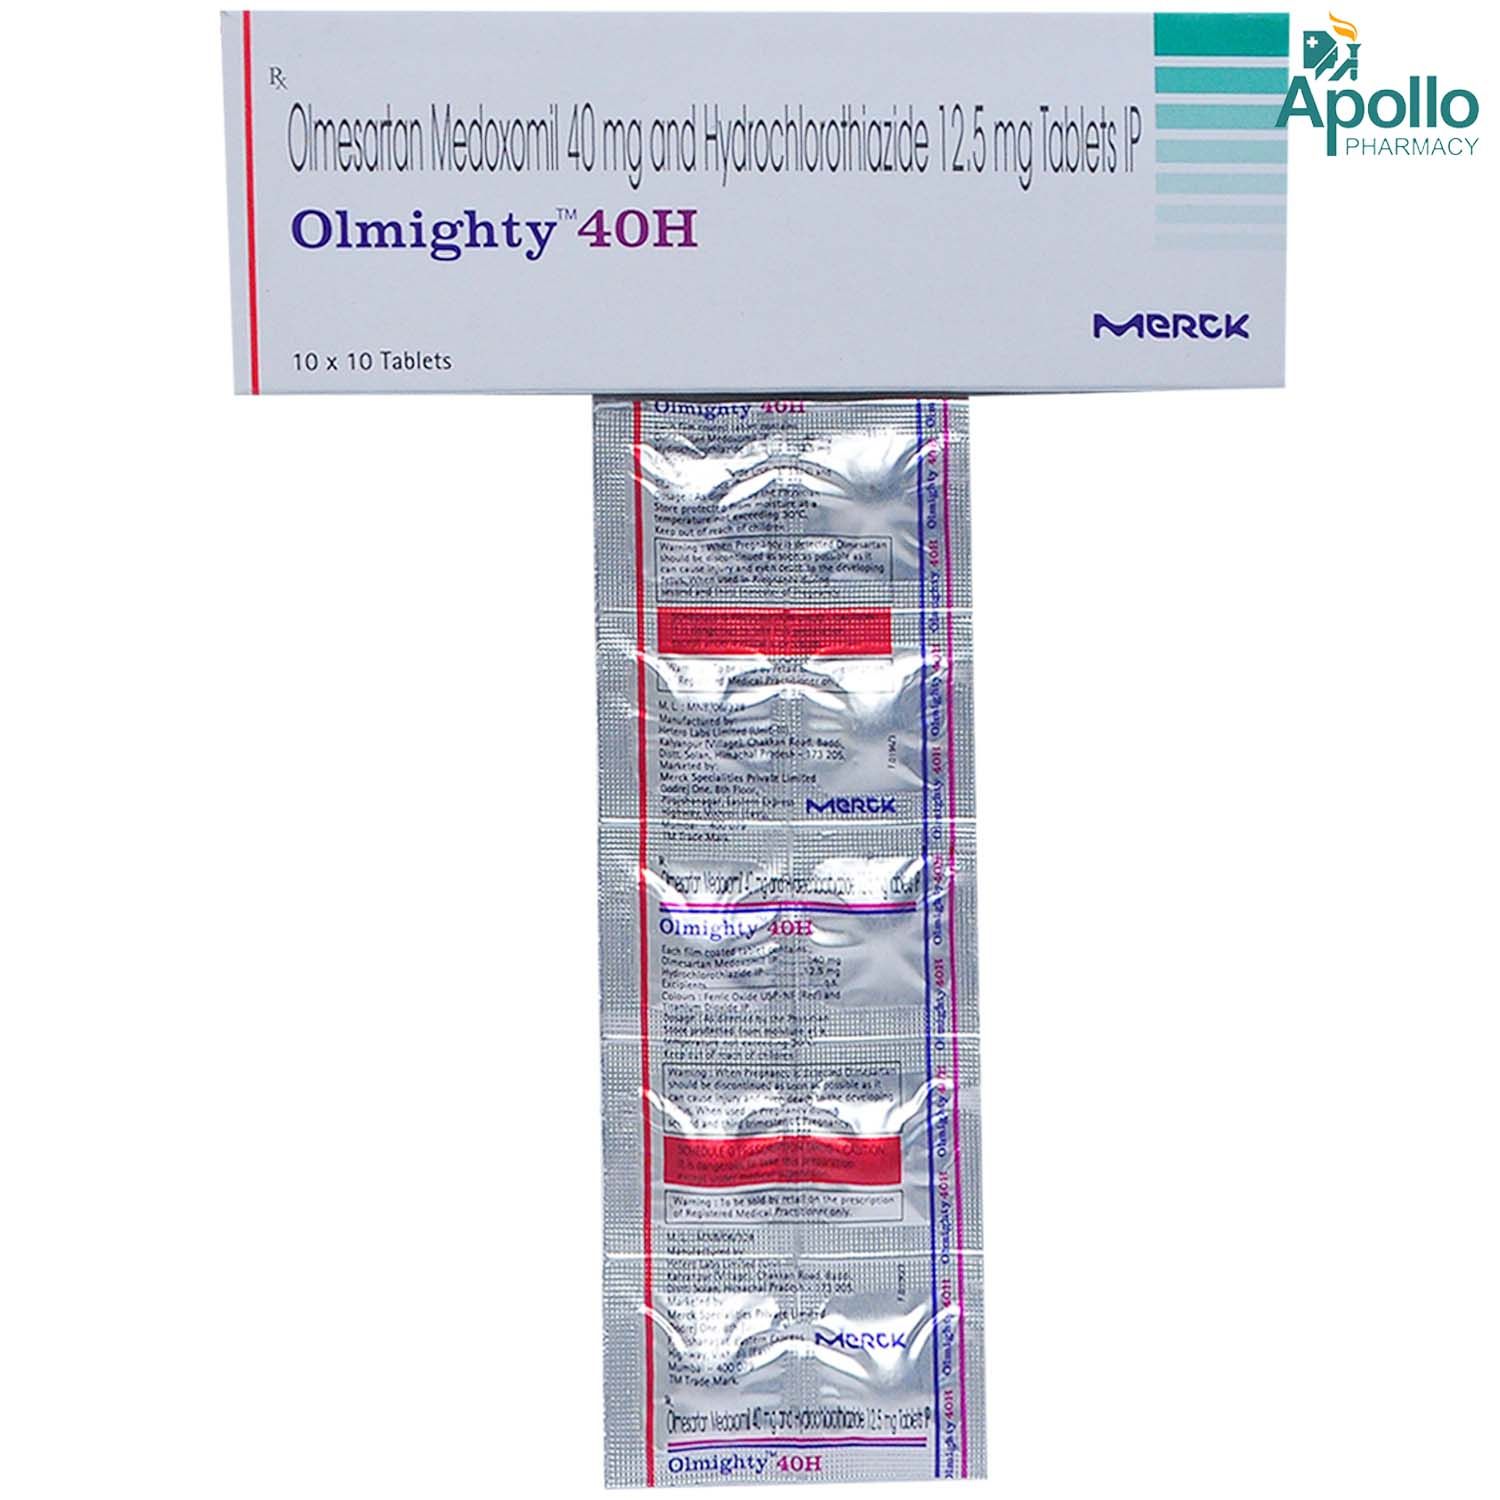 Olmighty 40H, Prescription, Treatment: High Blood Pressure at Rs